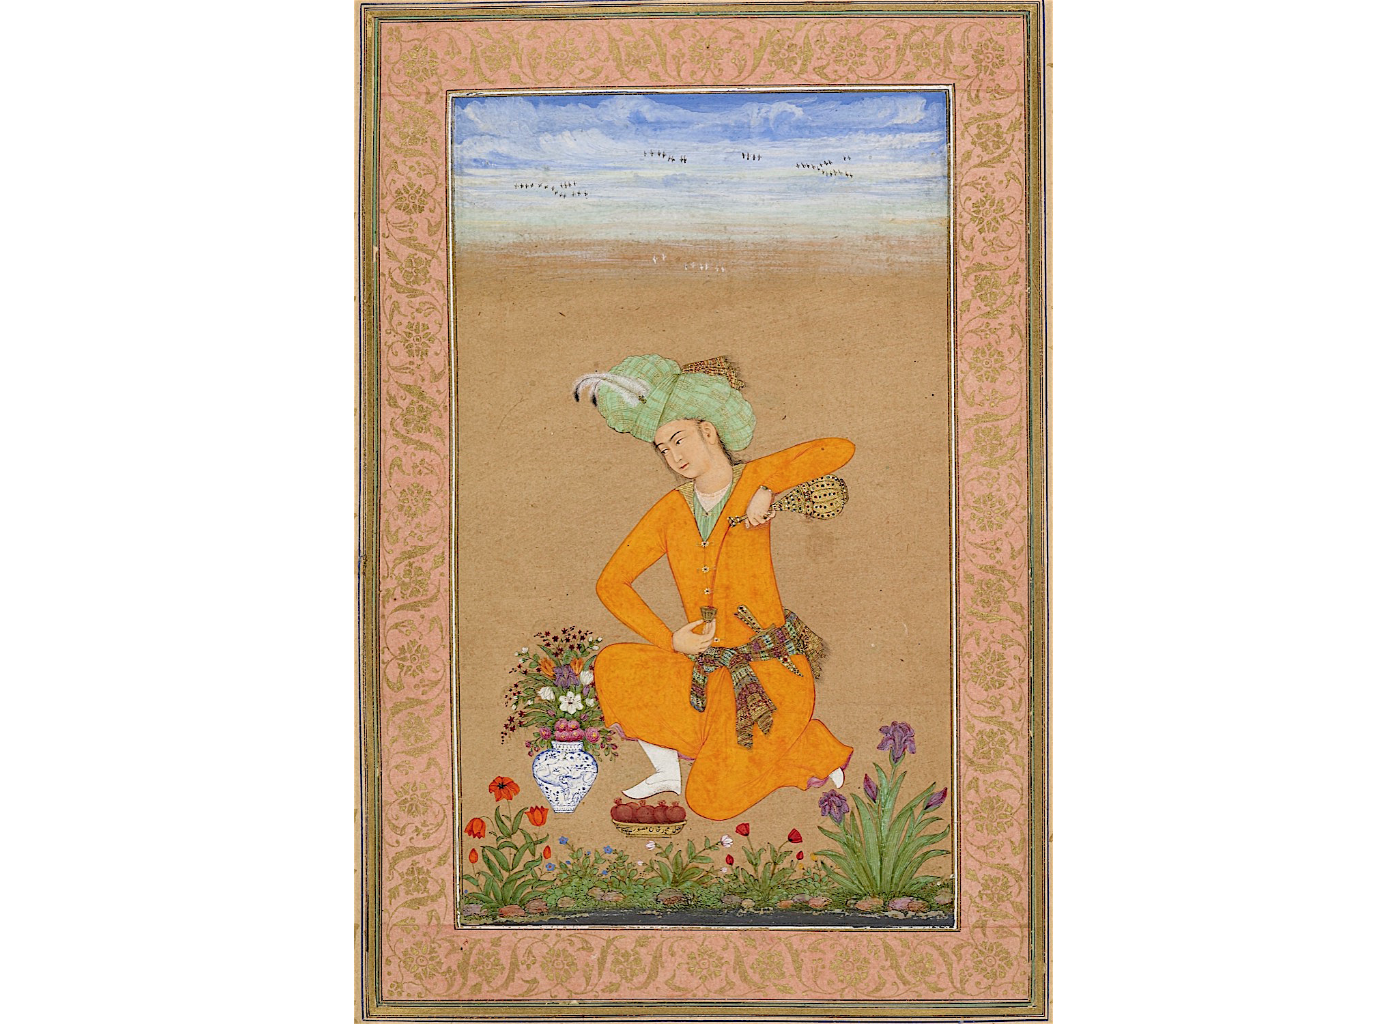 A Prince Pouring Wine, ascribed to Muhammad Khan and dated 1043/1633-4